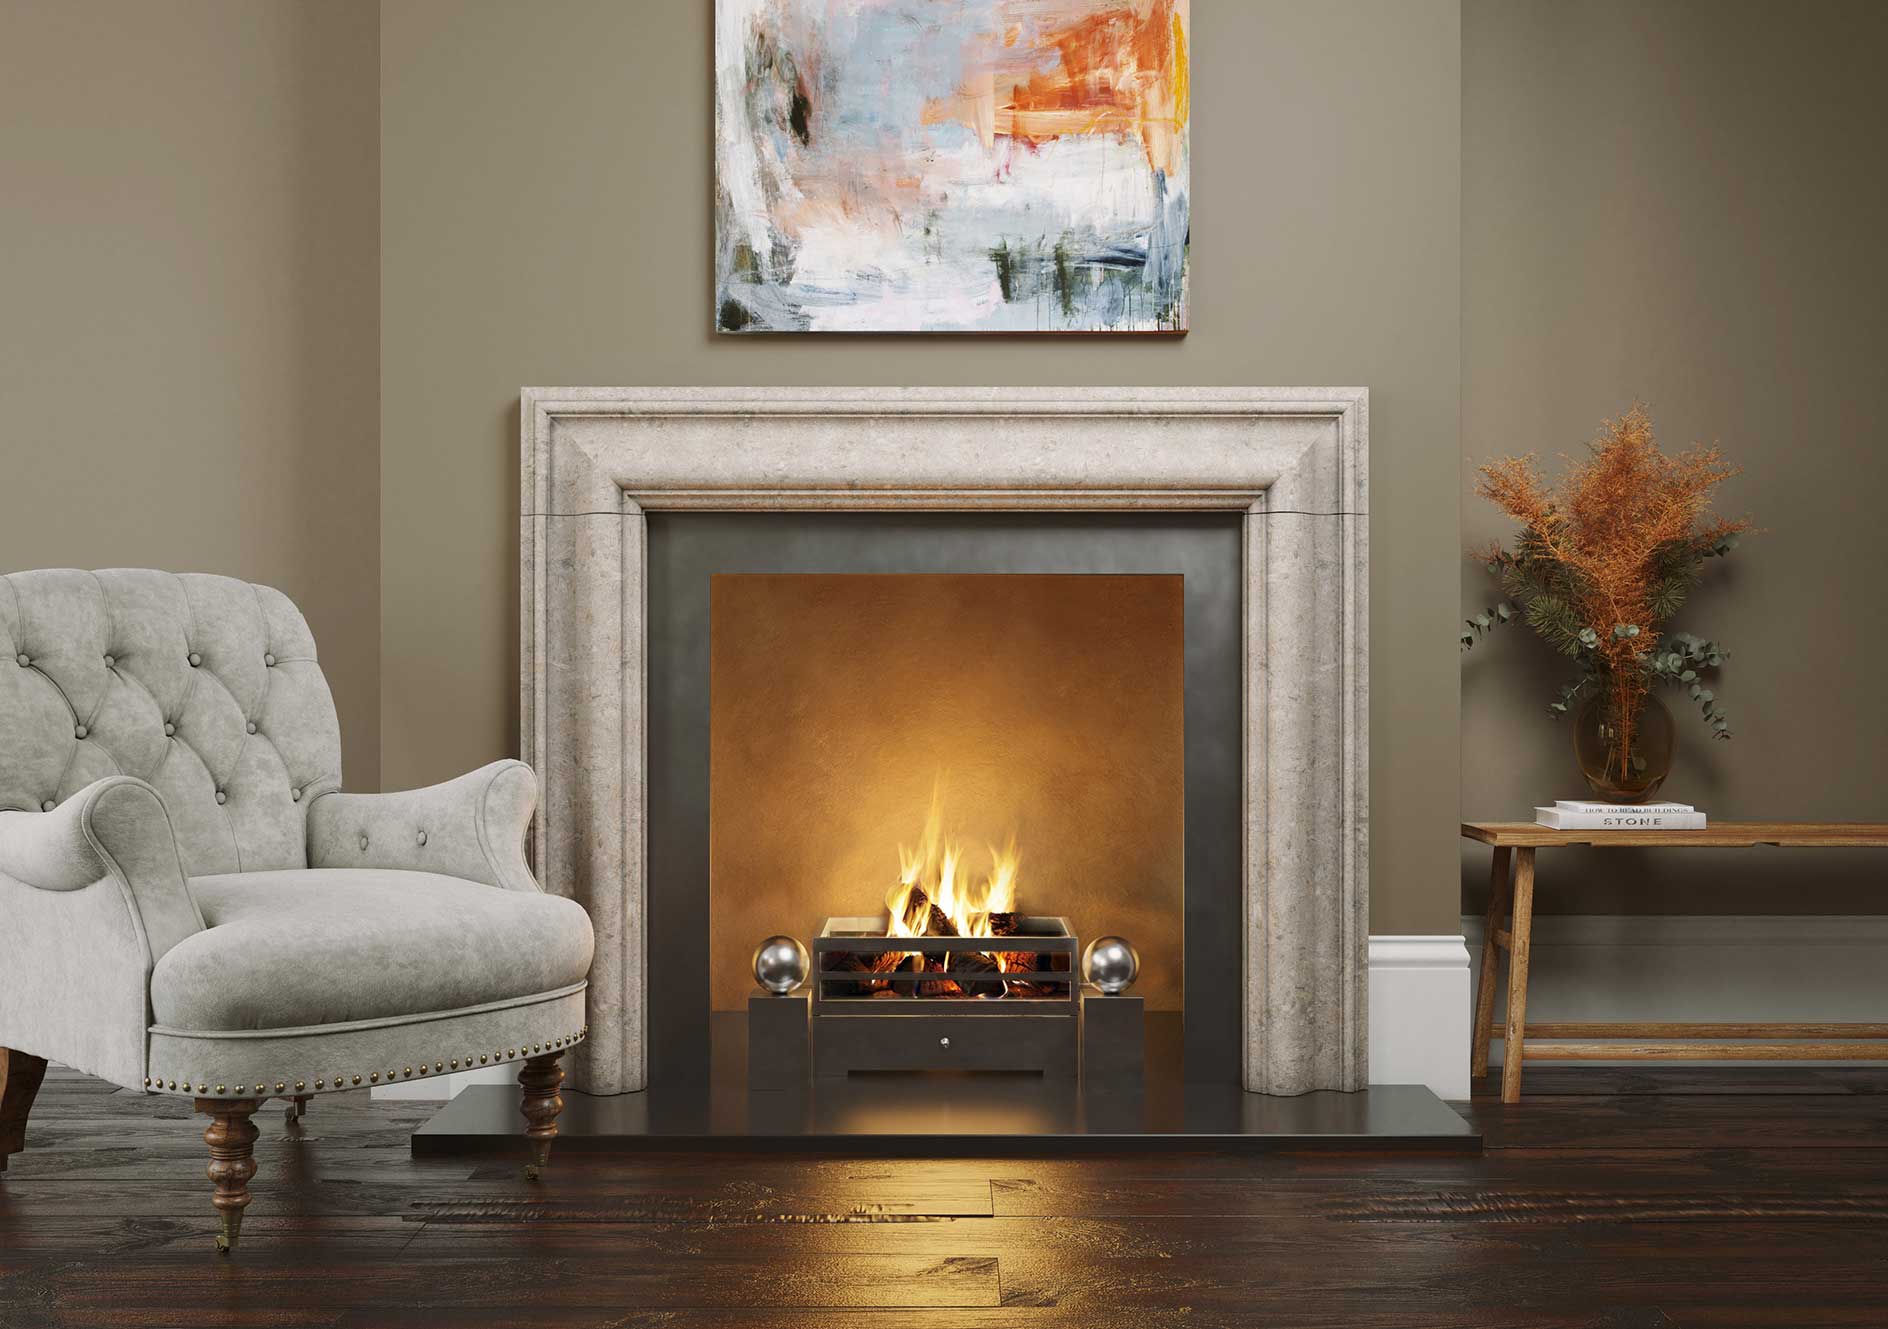 How To Maintain A Gas Fireplace